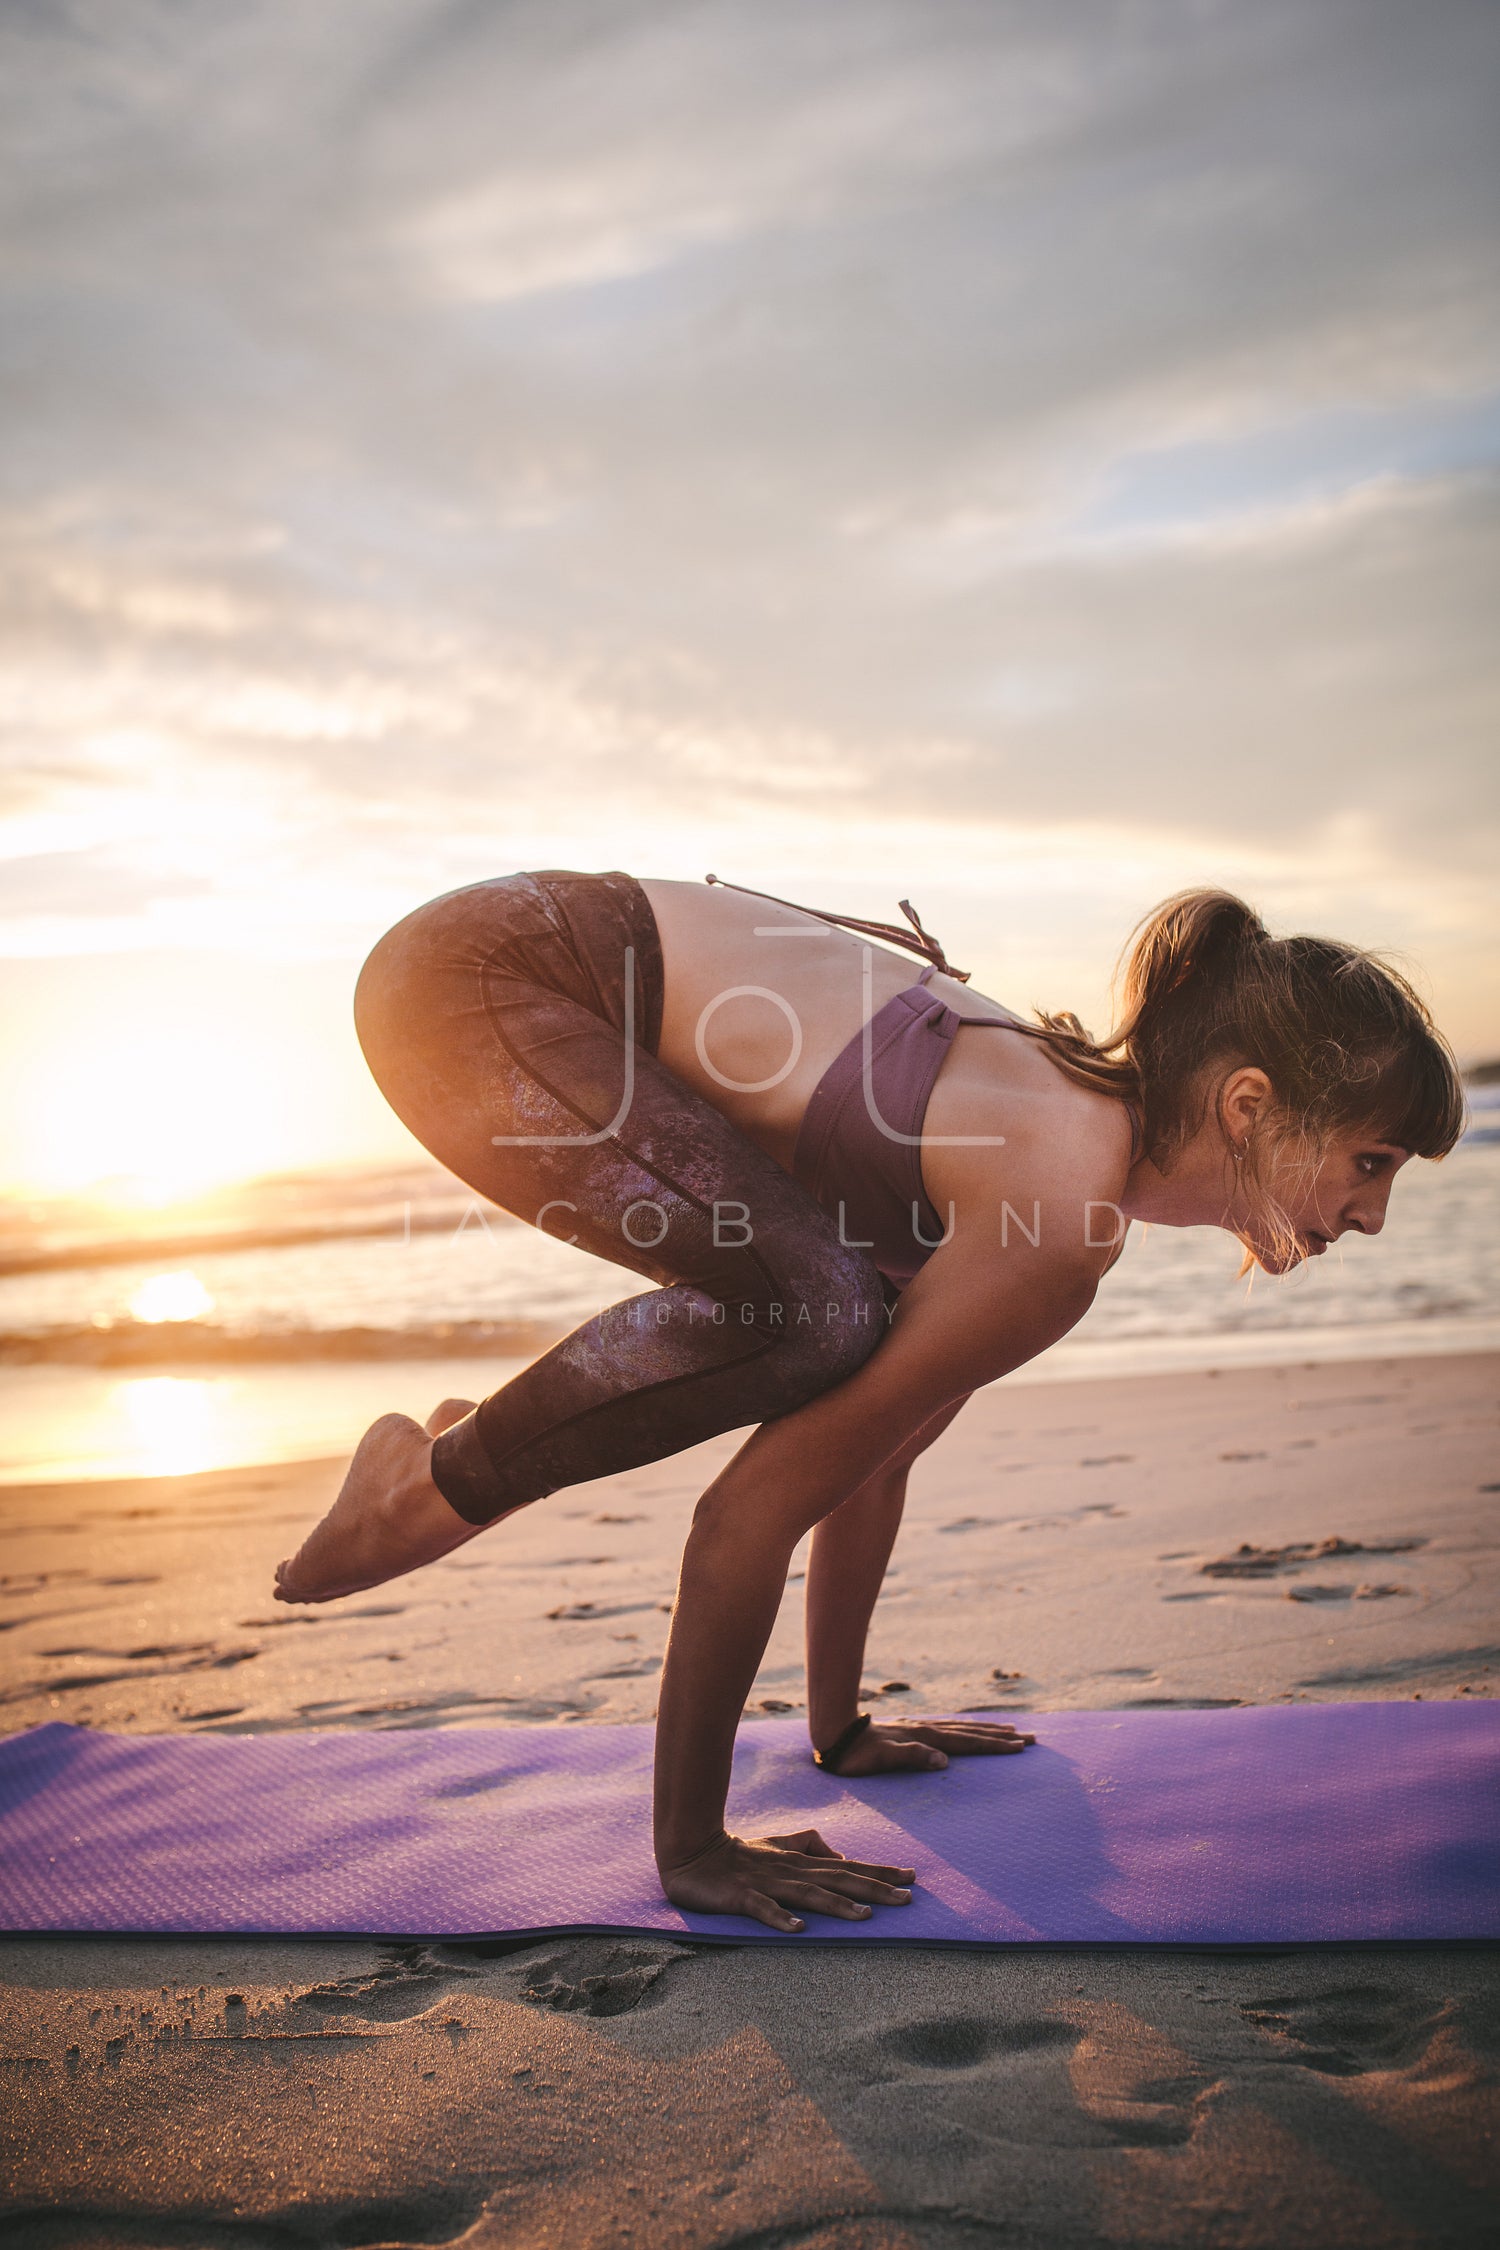 A woman is doing a yoga pose on a mat photo – Yoga poses Image on Unsplash